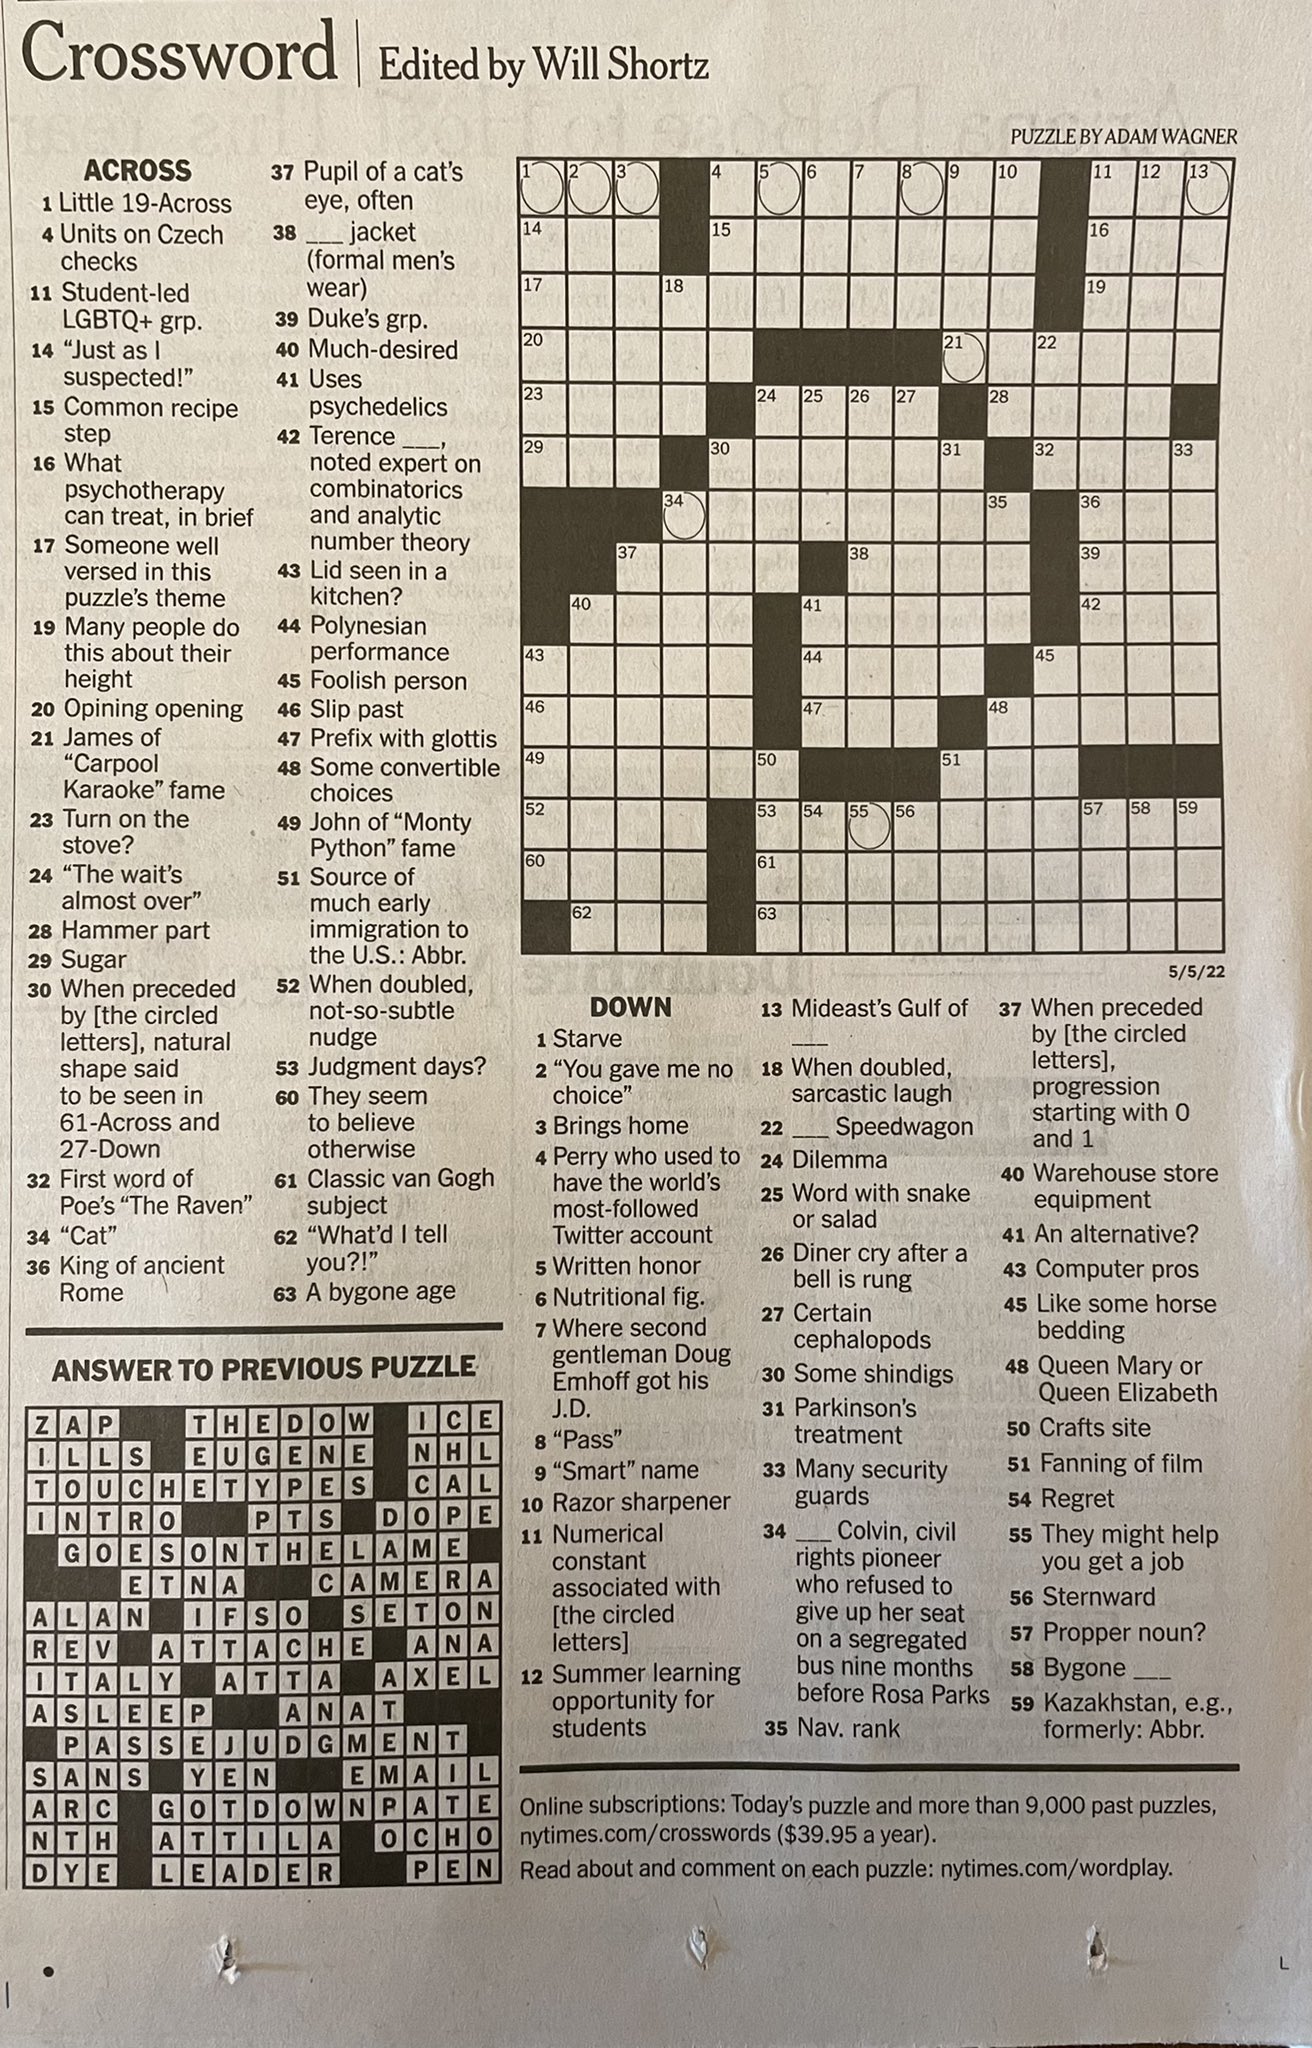 Dressing extreme? crossword clue Archives - LAXCrossword.com